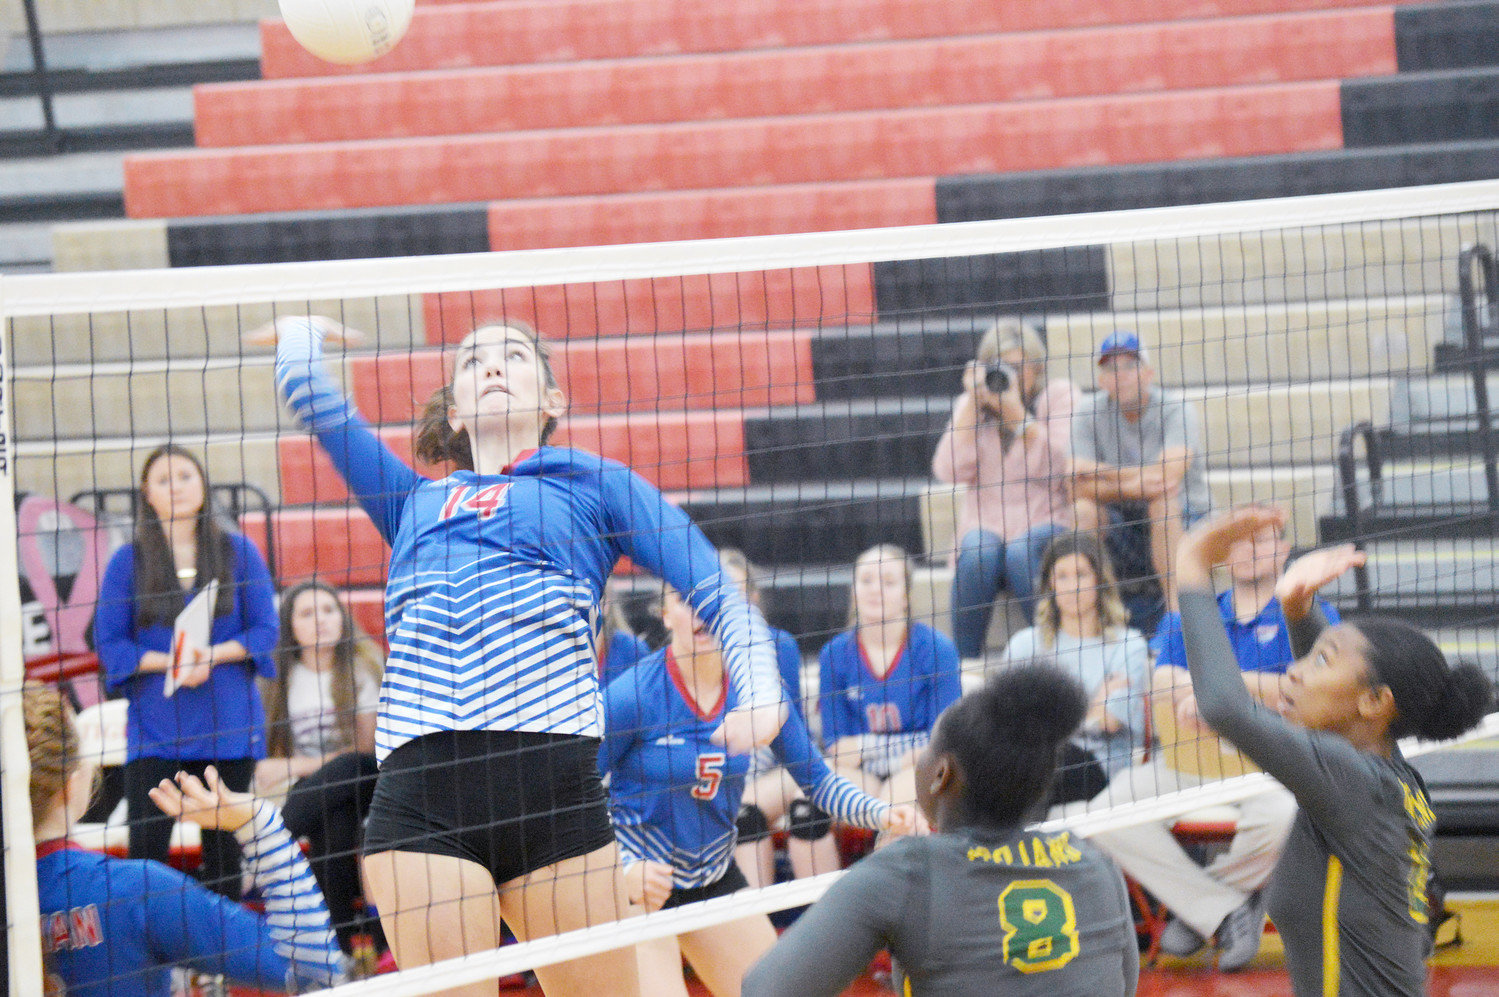 Quitman freshman middle blocker Ava Burroughs goes high for a kill in bi-district action against Dallas Madison last week. (Monitor photo by Larry Tucker)